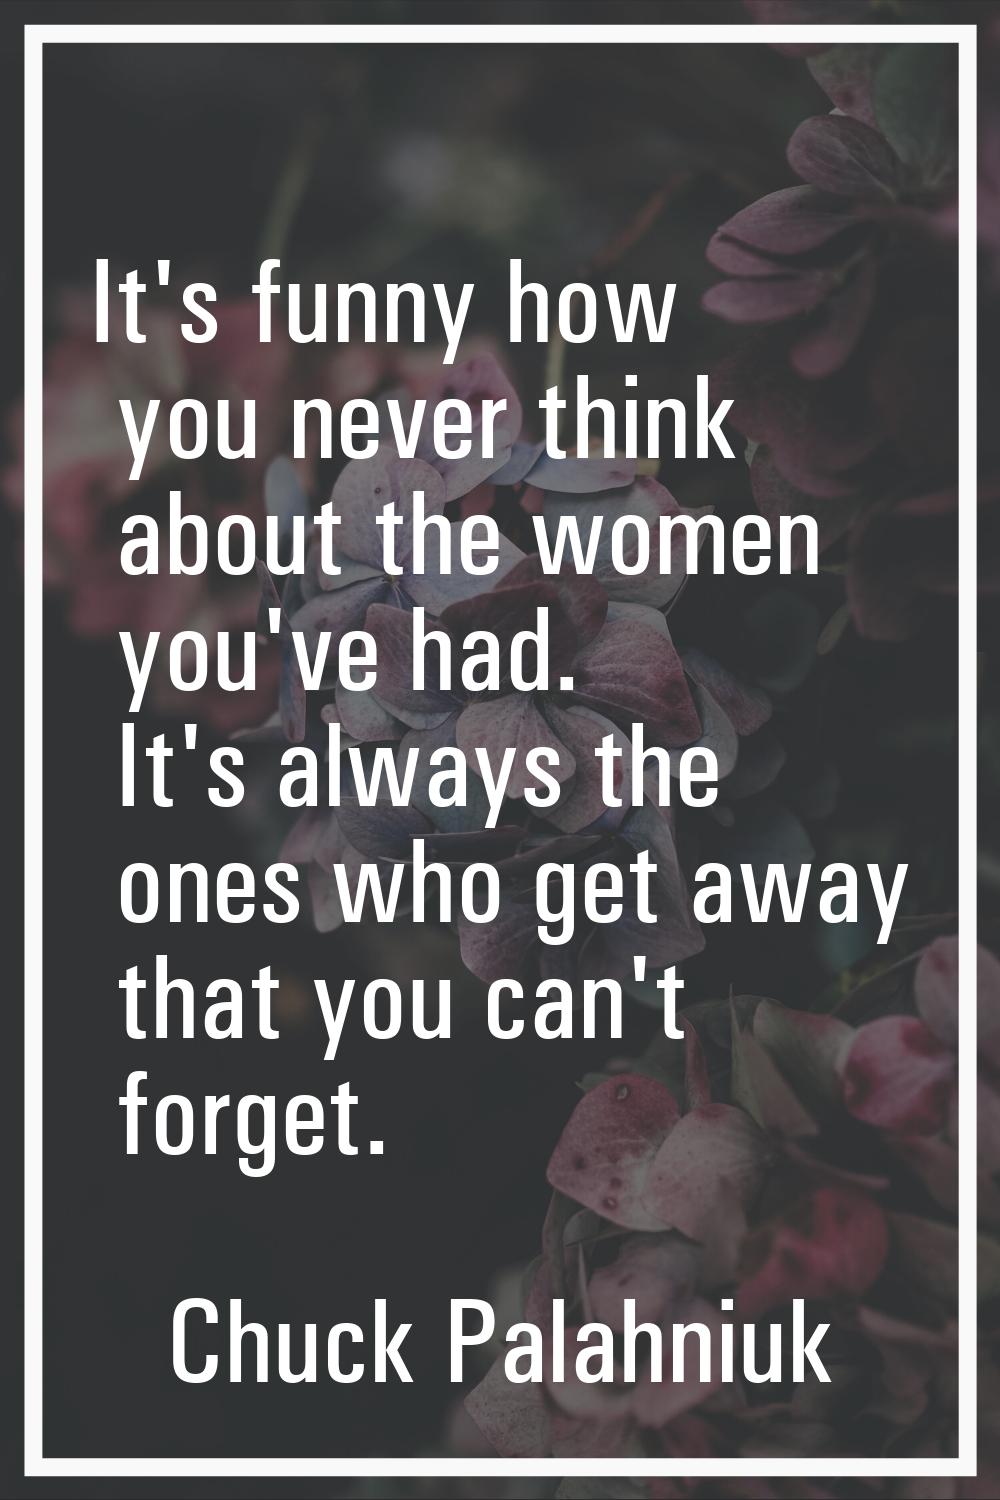 It's funny how you never think about the women you've had. It's always the ones who get away that y